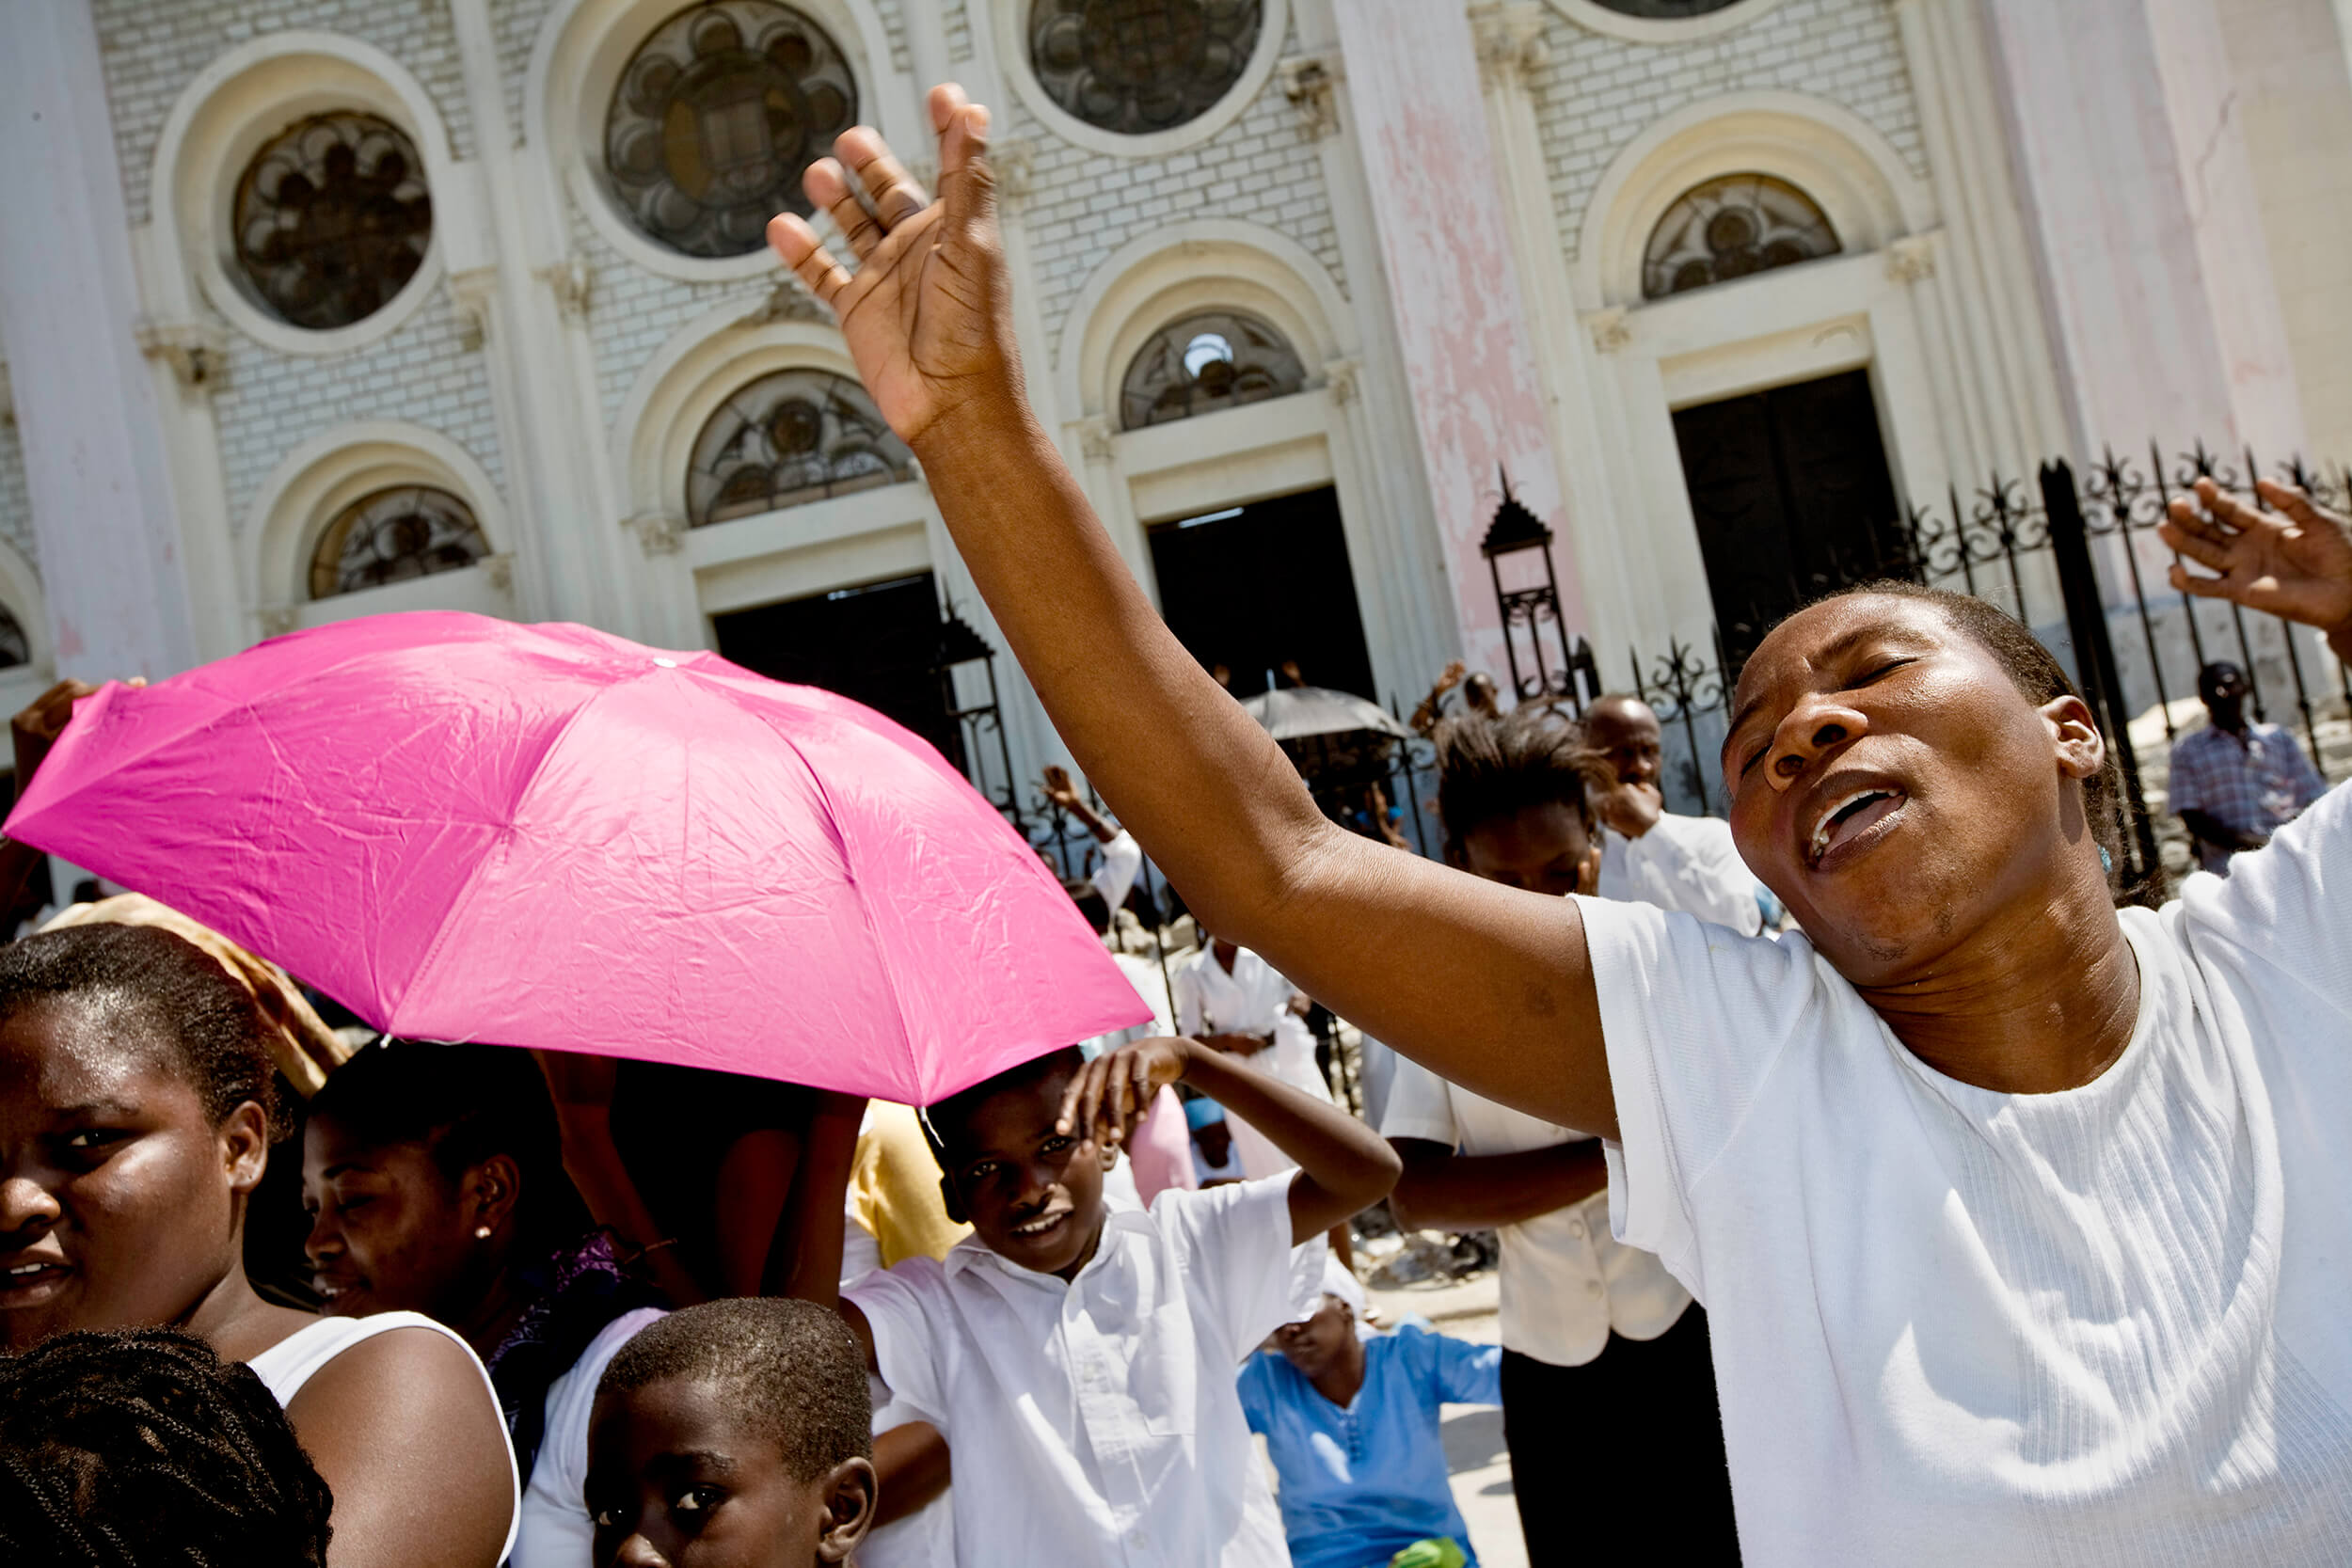  The earthquake in Haiti in 2010 had a magnitude of about 7.8 on the Richter scale. 